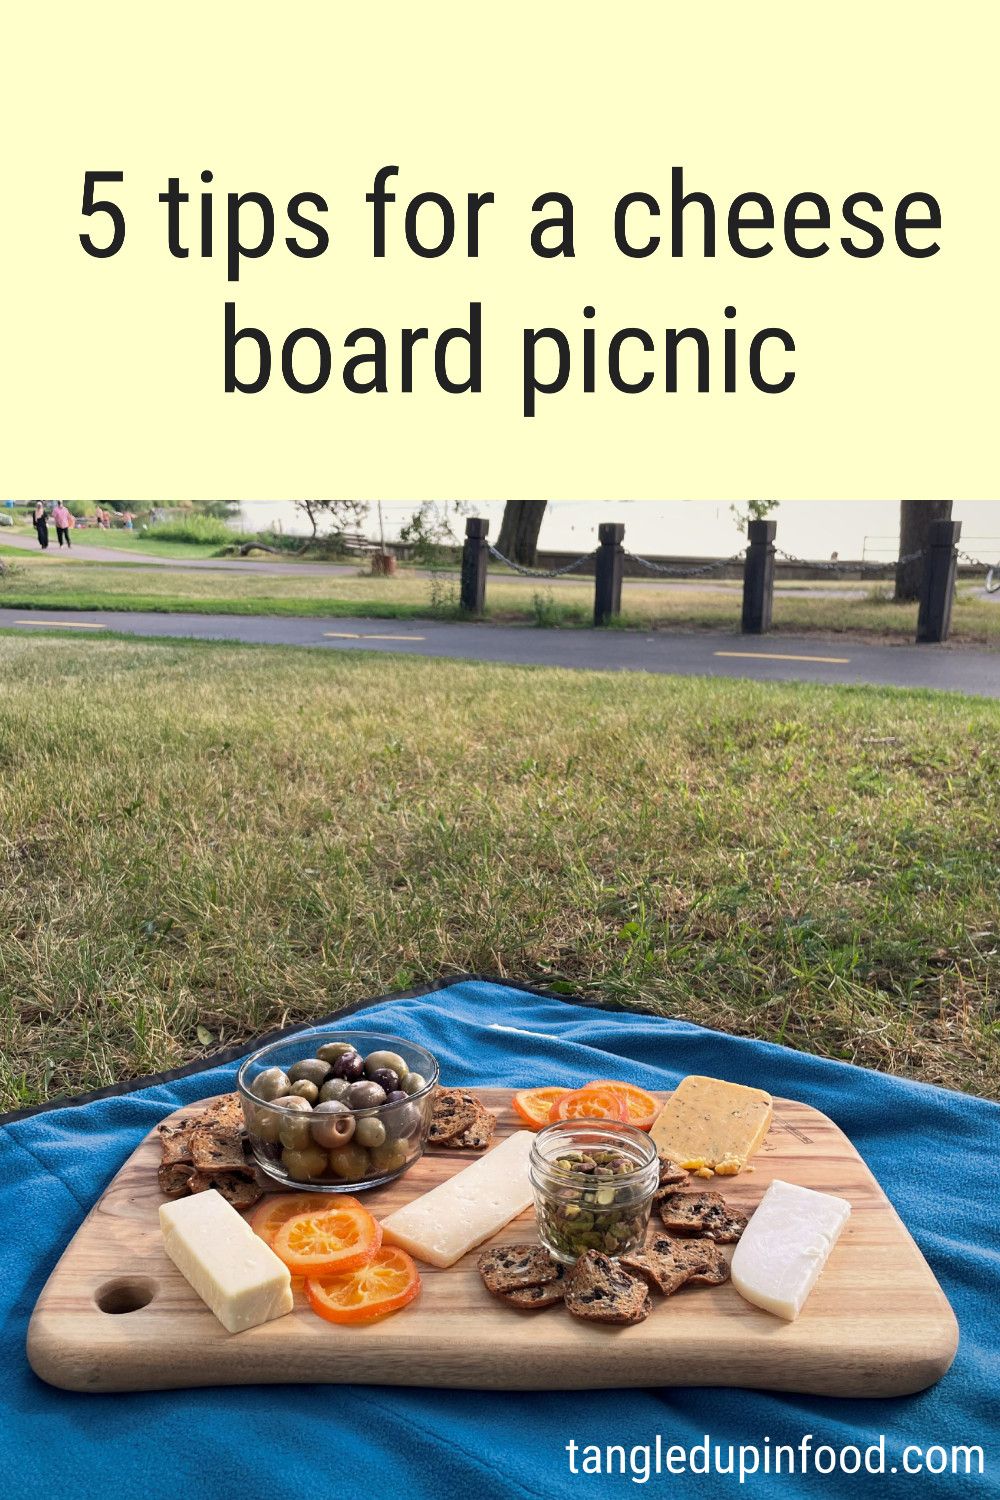 Photo of cheese board on picnic blanket with text reading "5 tips for a cheese board picnic"